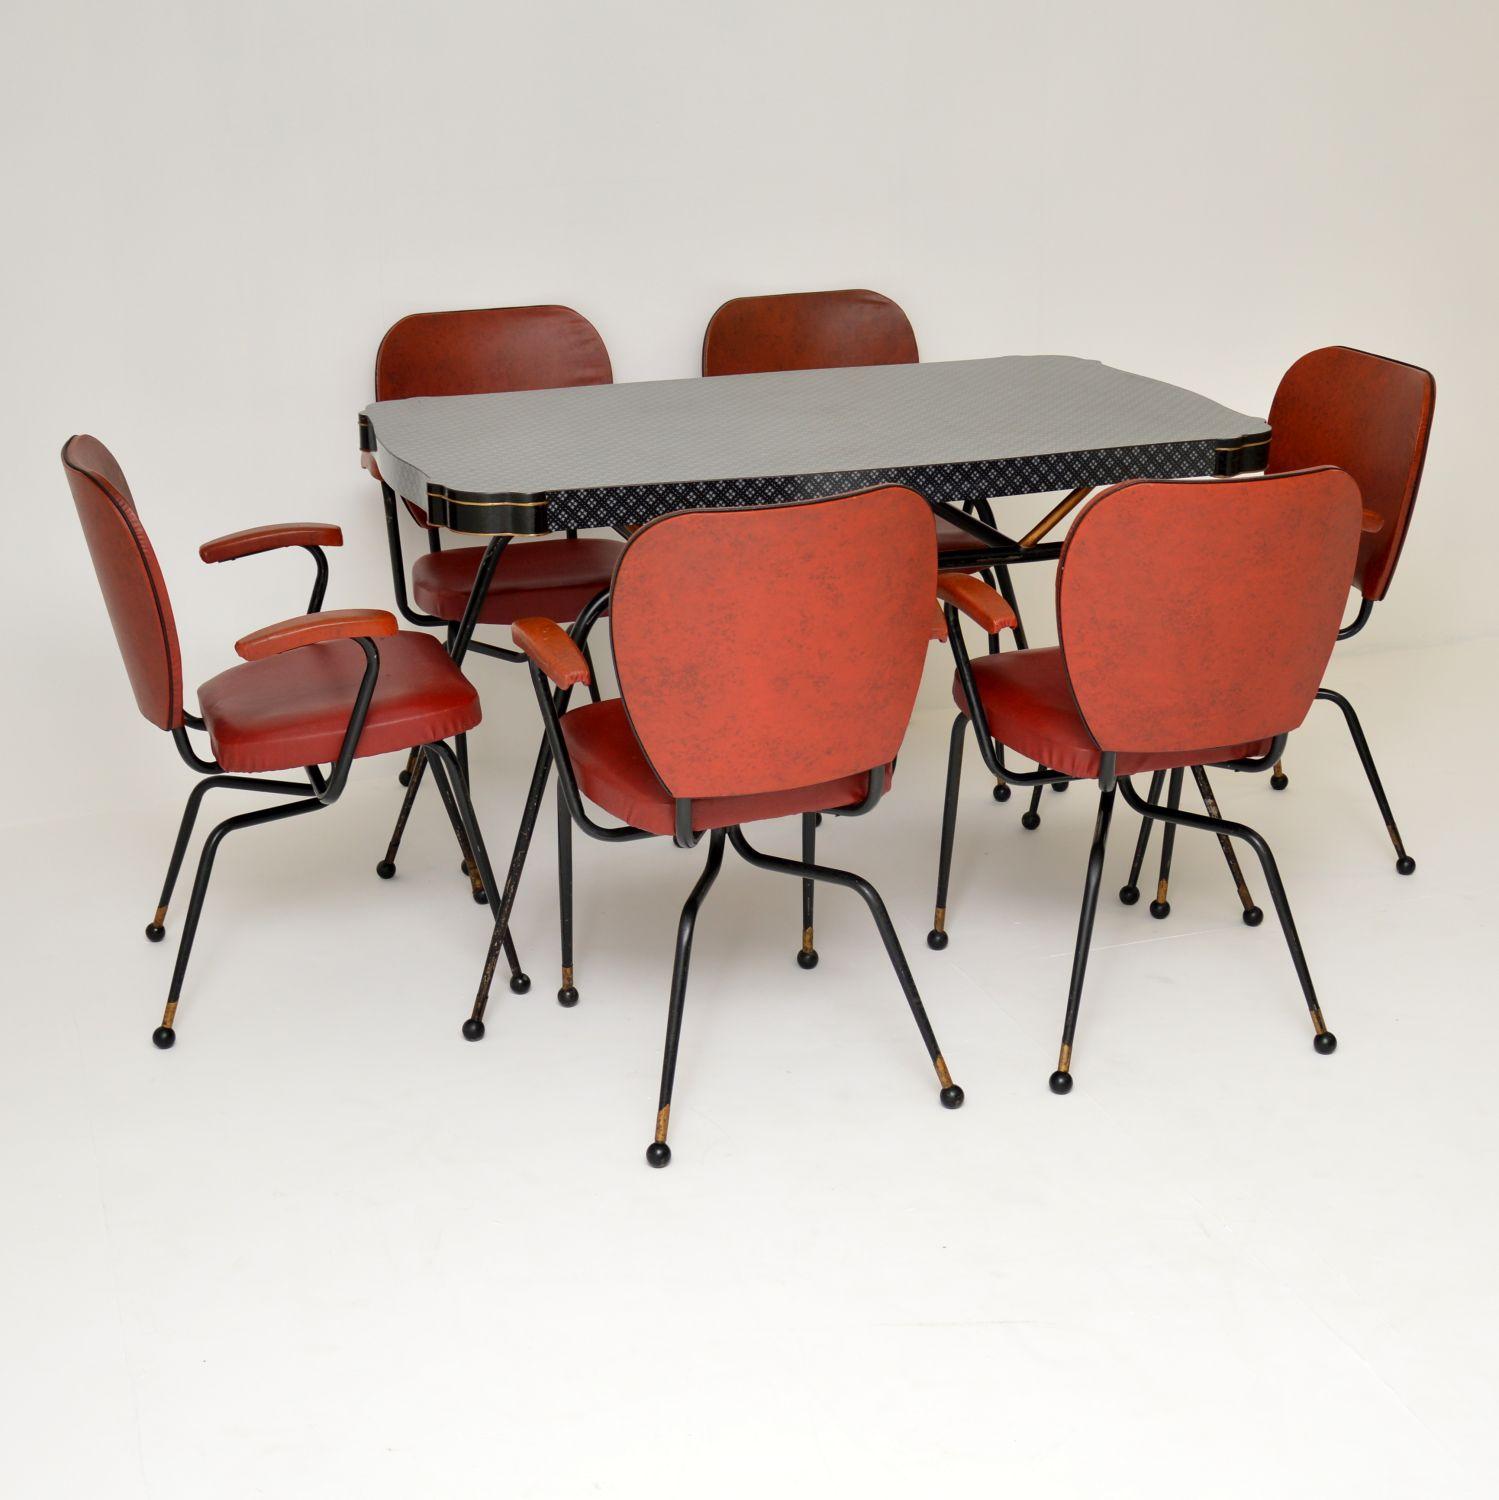 A super stylish and very rare vintage dining table and chairs, dating from the 1950s. The table has a beautiful shape, clean Formica top, and amazing ebonized steel base. The legs have brass accents and terminate in lovely balls. The chairs were